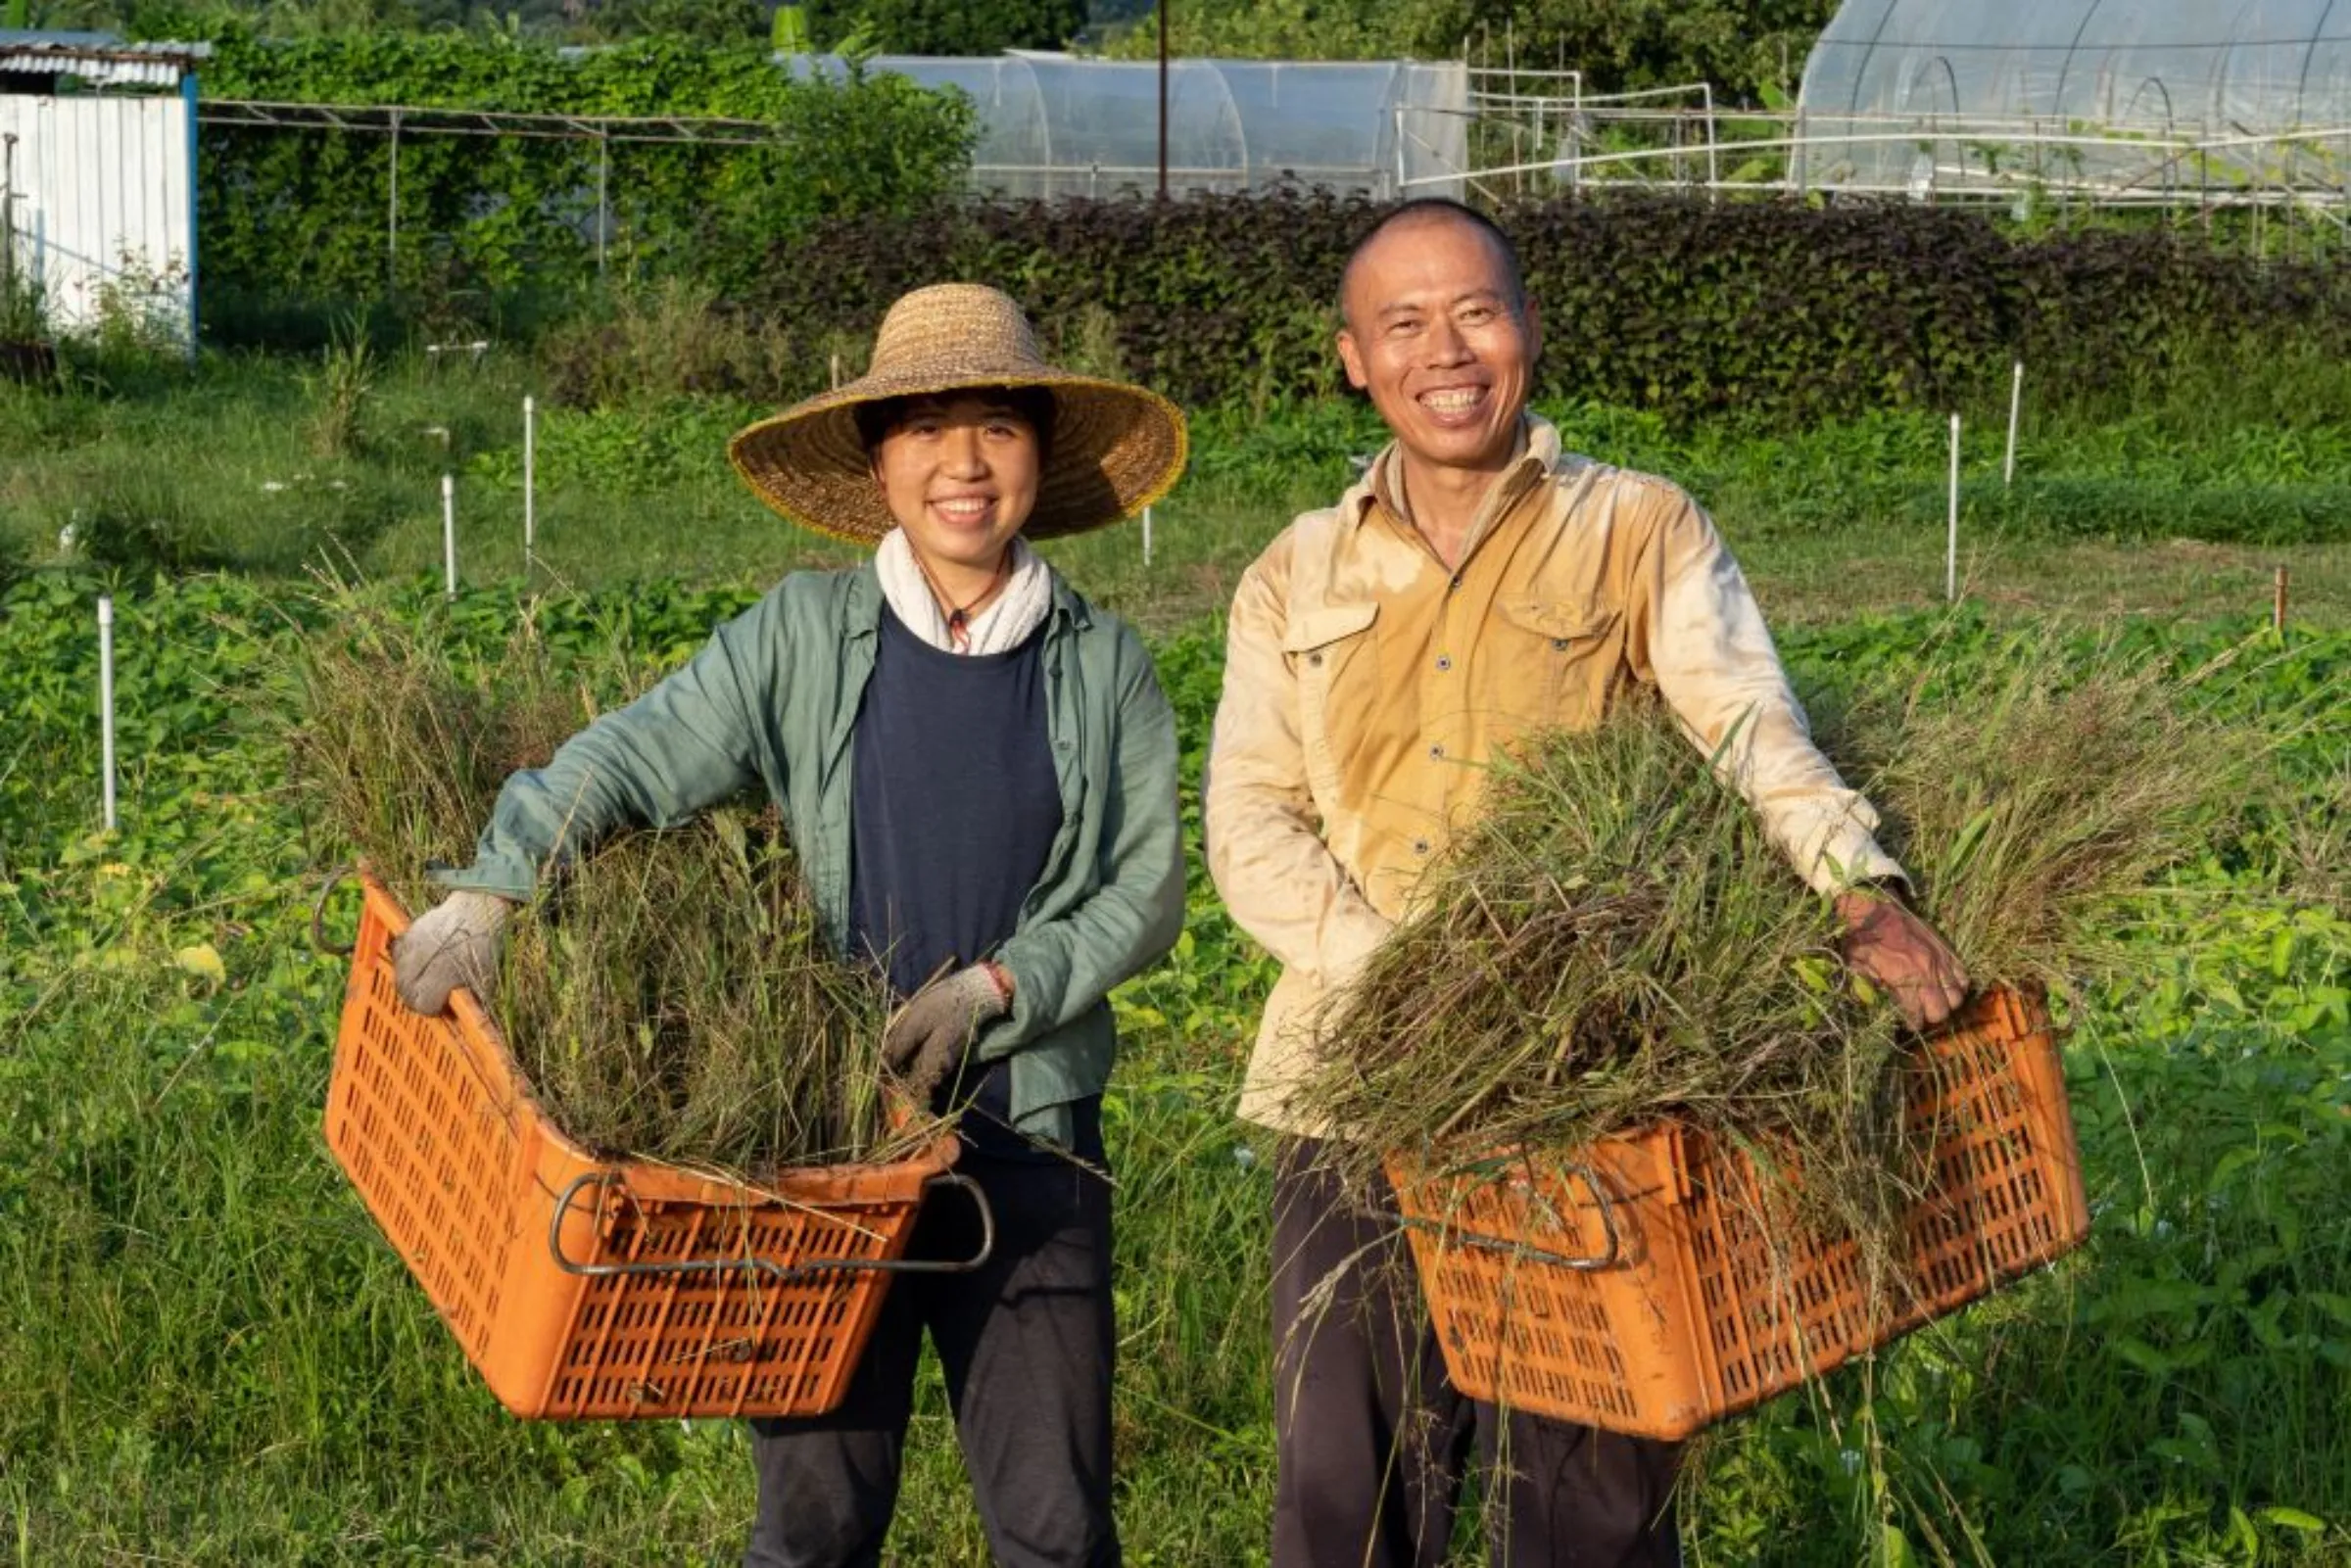 Yu-wing Wong is seen with his assistant Kelly Lau at his farm in the New Territories, Hong Kong in 2020. Handout via Thomson Reuters Foundation